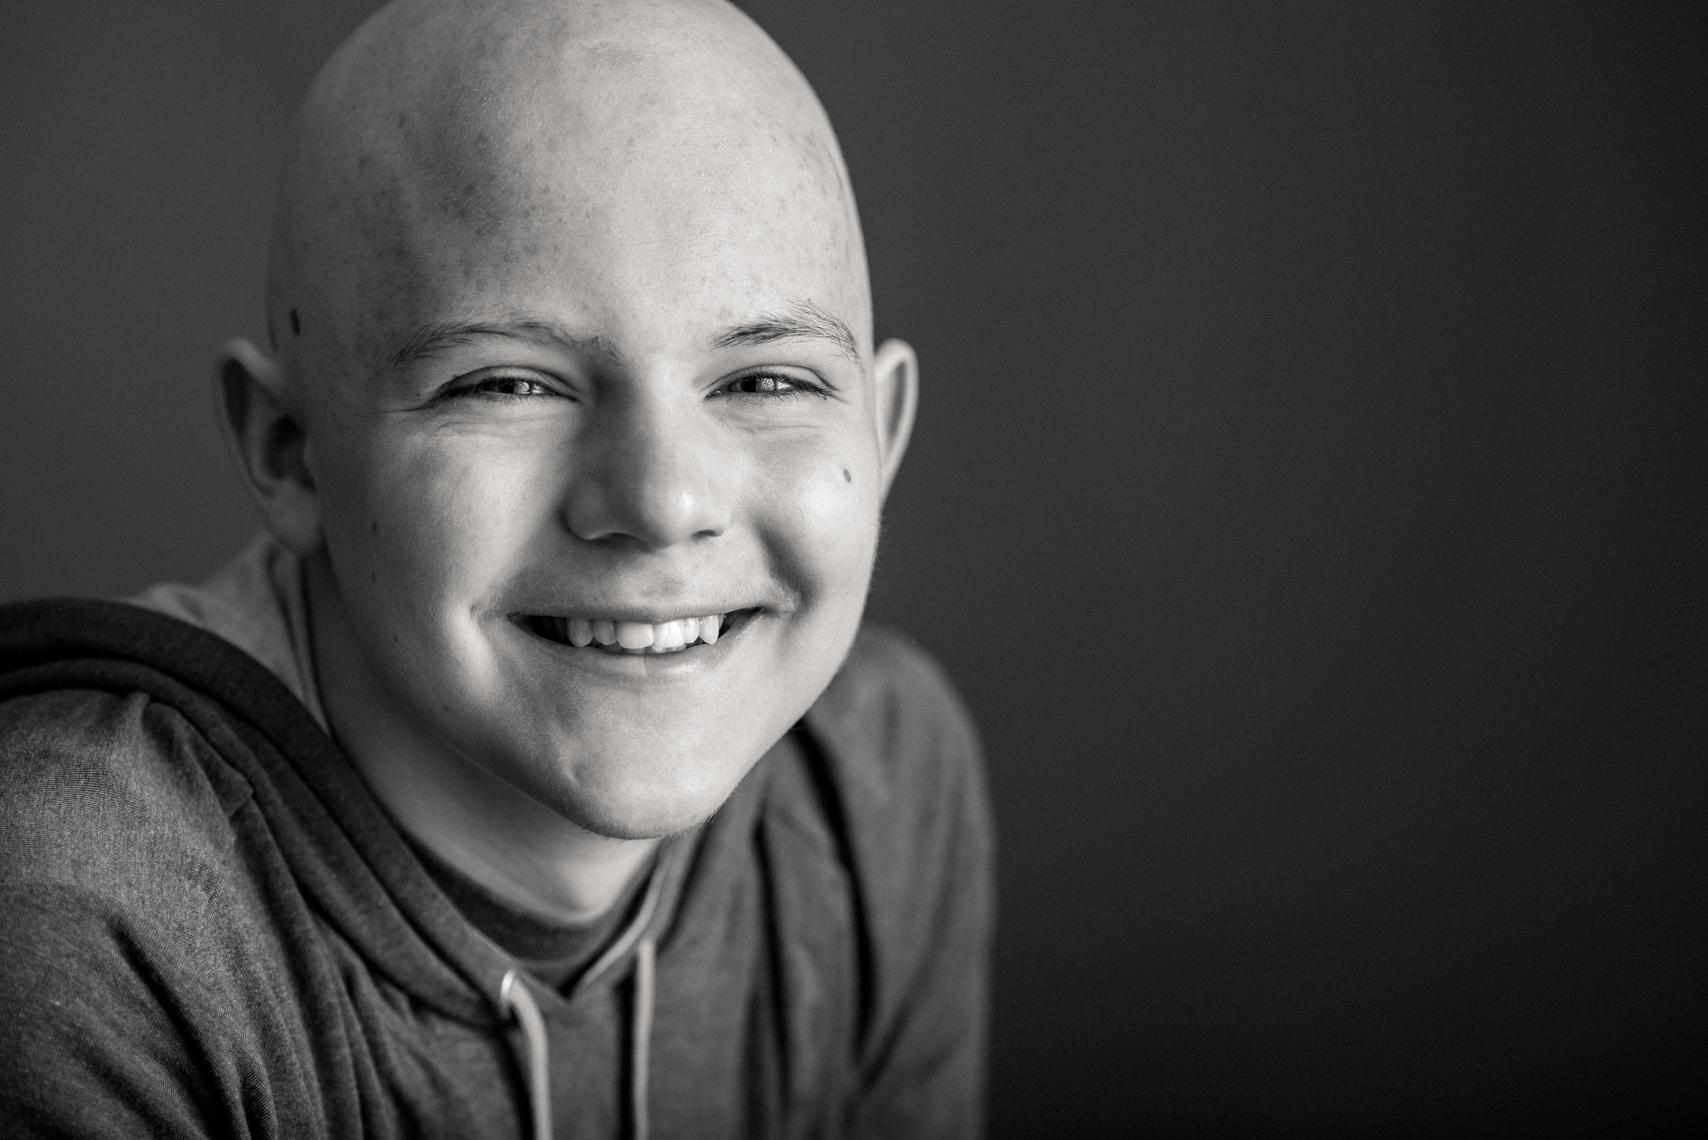 Flashes of Hope, portrait of a teen boy who is fighting cancer. Family support, smiling, resilience, authentic, strength, Nashville, portrait, editorial, reportage, news, photographer, portraiture